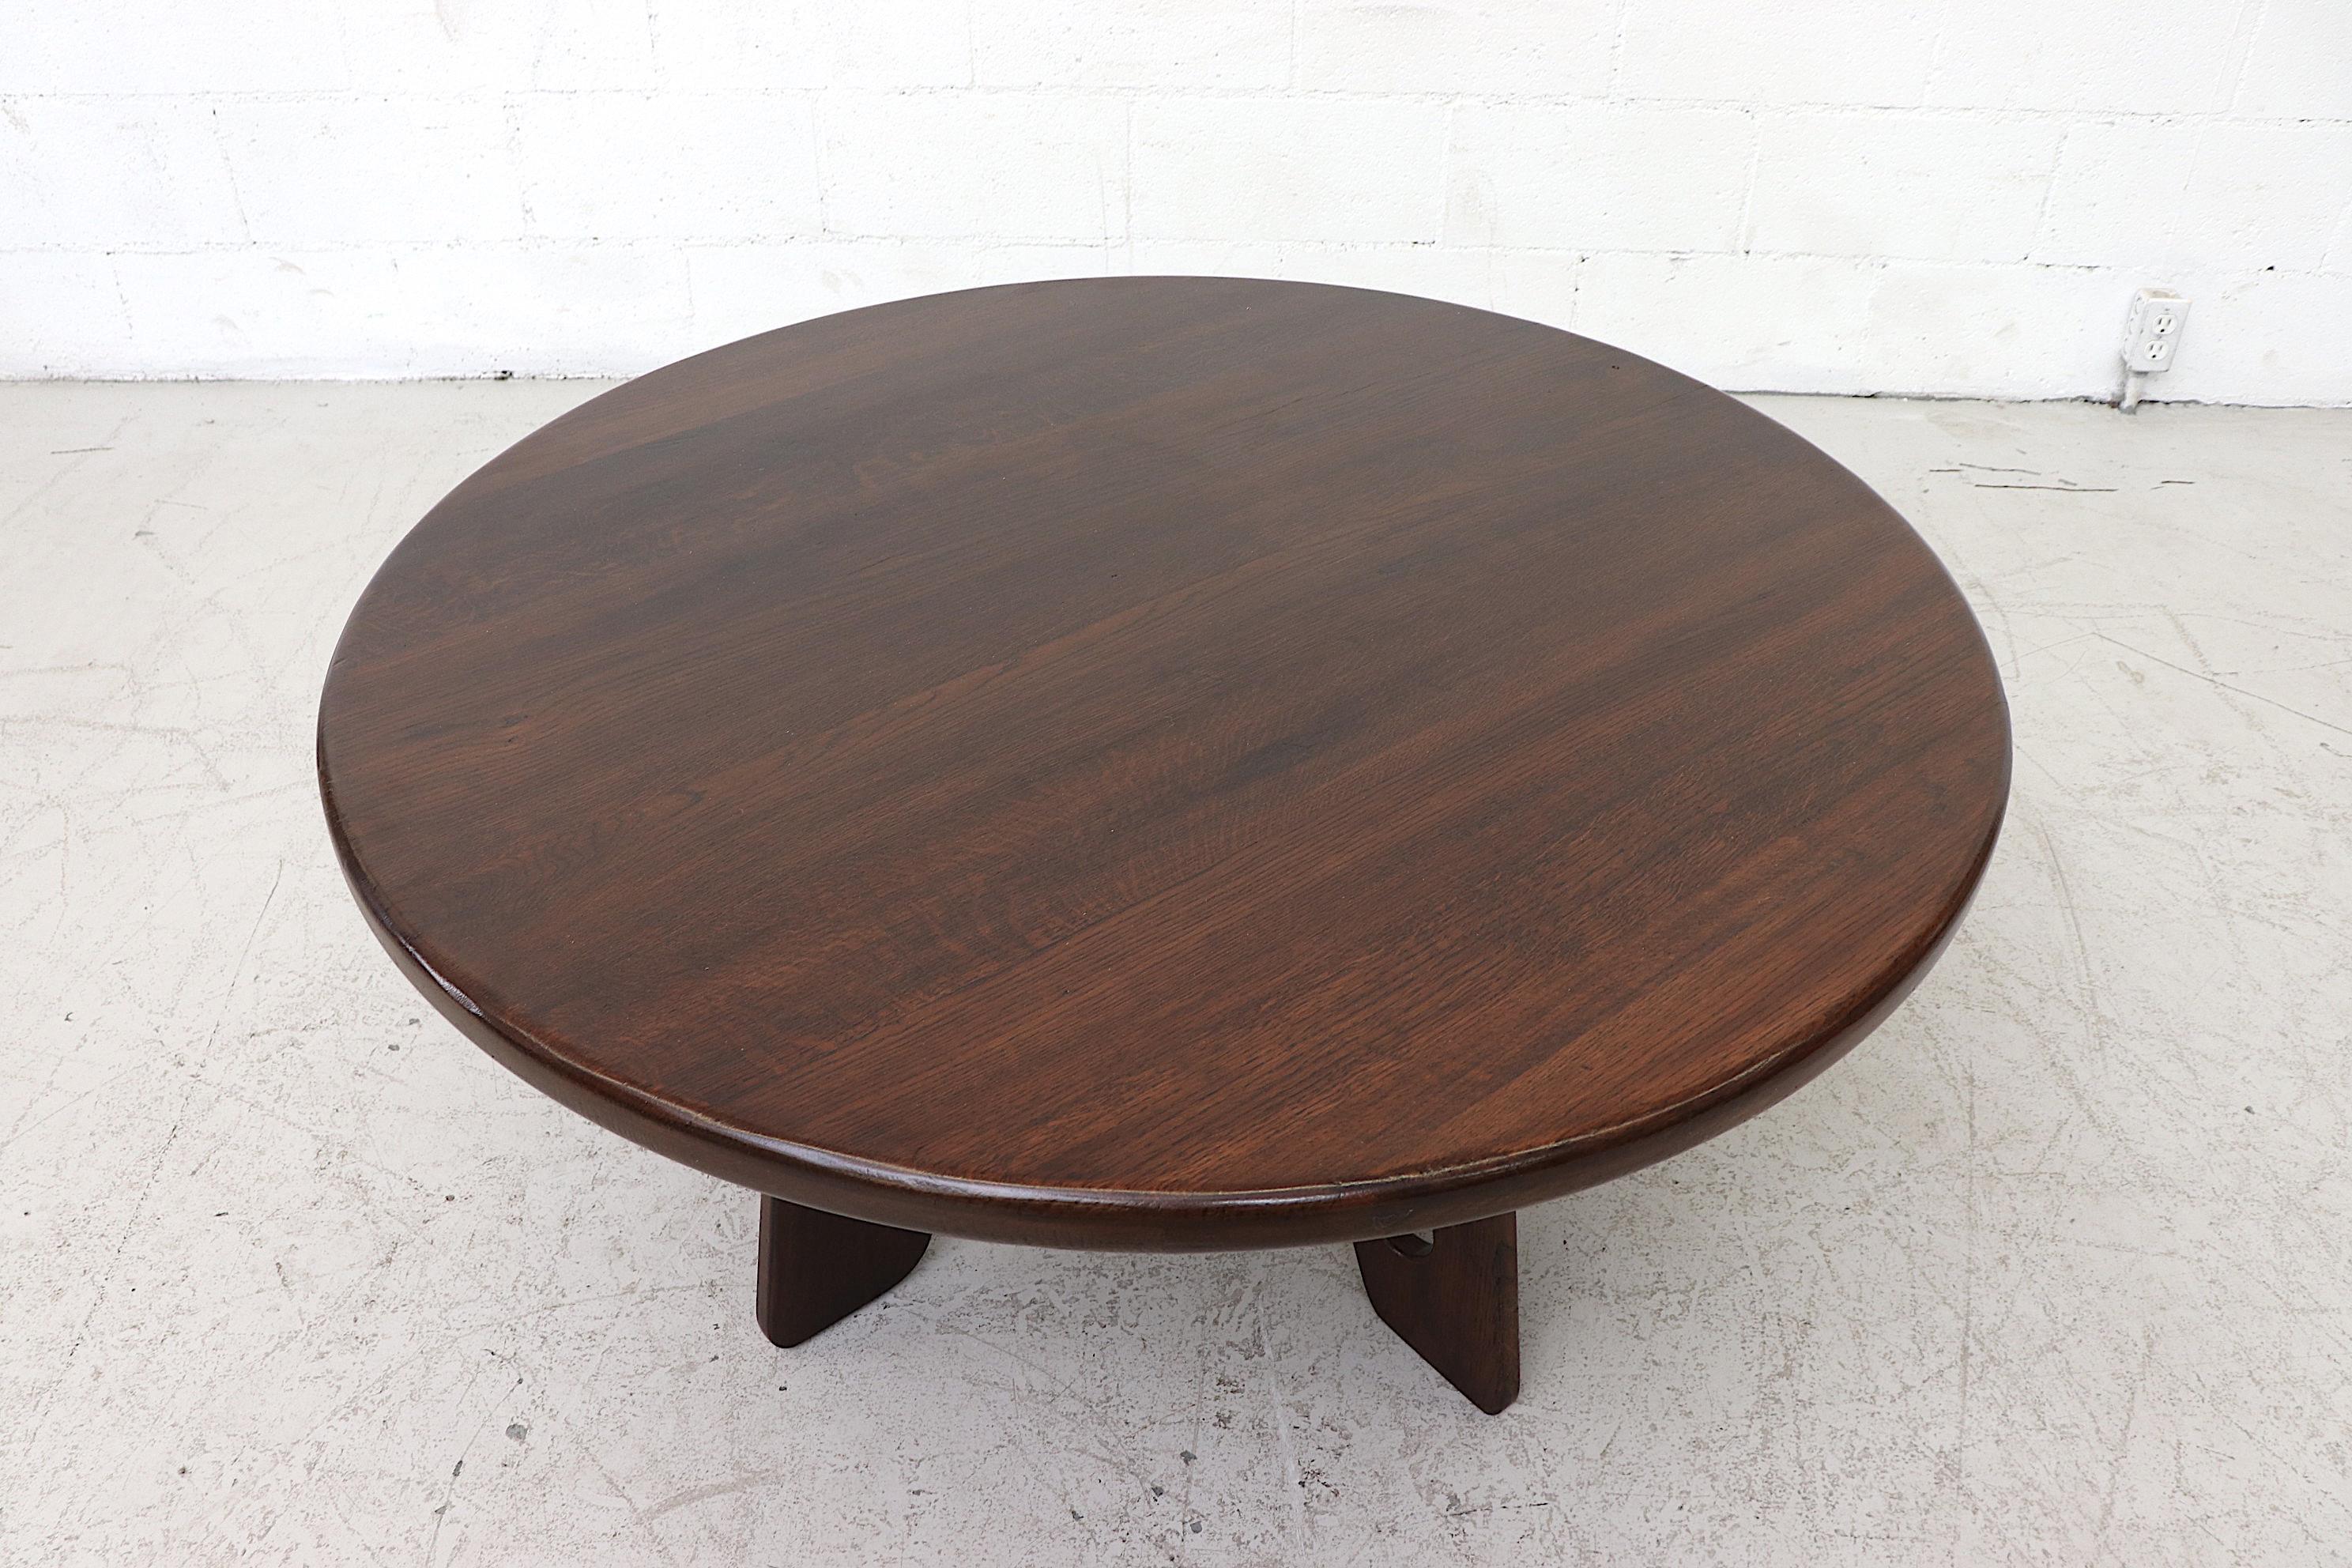 Stained Gilbert Marklund 'Attribute' Brutalist Round Wood Coffee Table